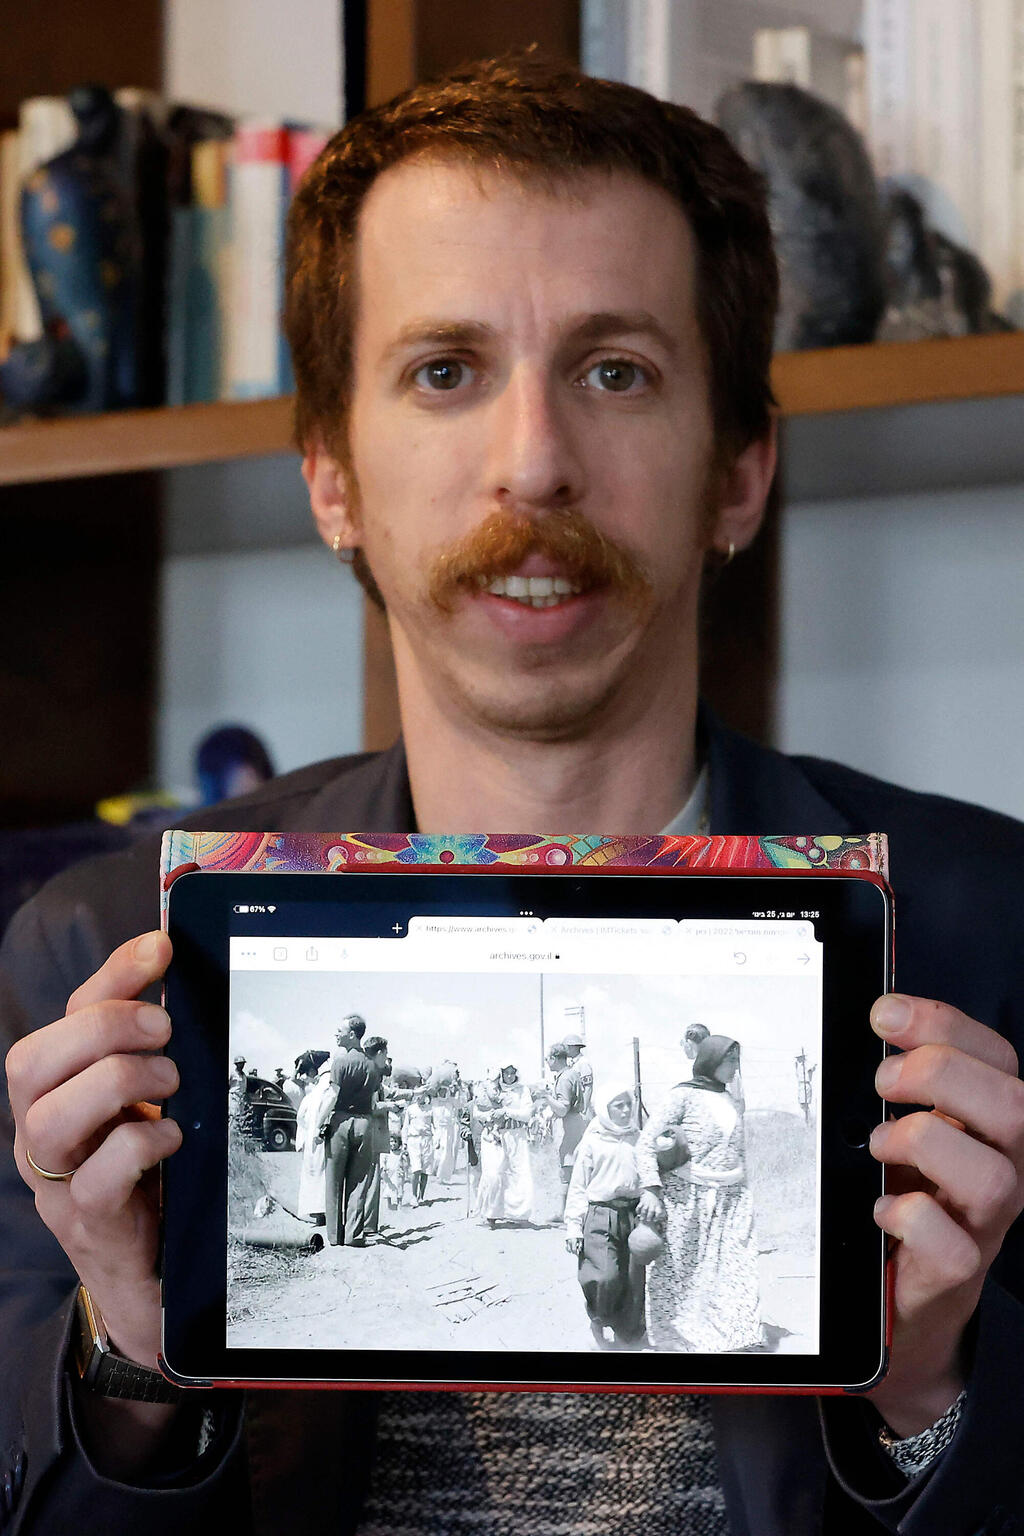 Adam Raz, an Israeli historian who works at Akevot, an organisation that specialises in state archives, displays an old picture of Palestinians